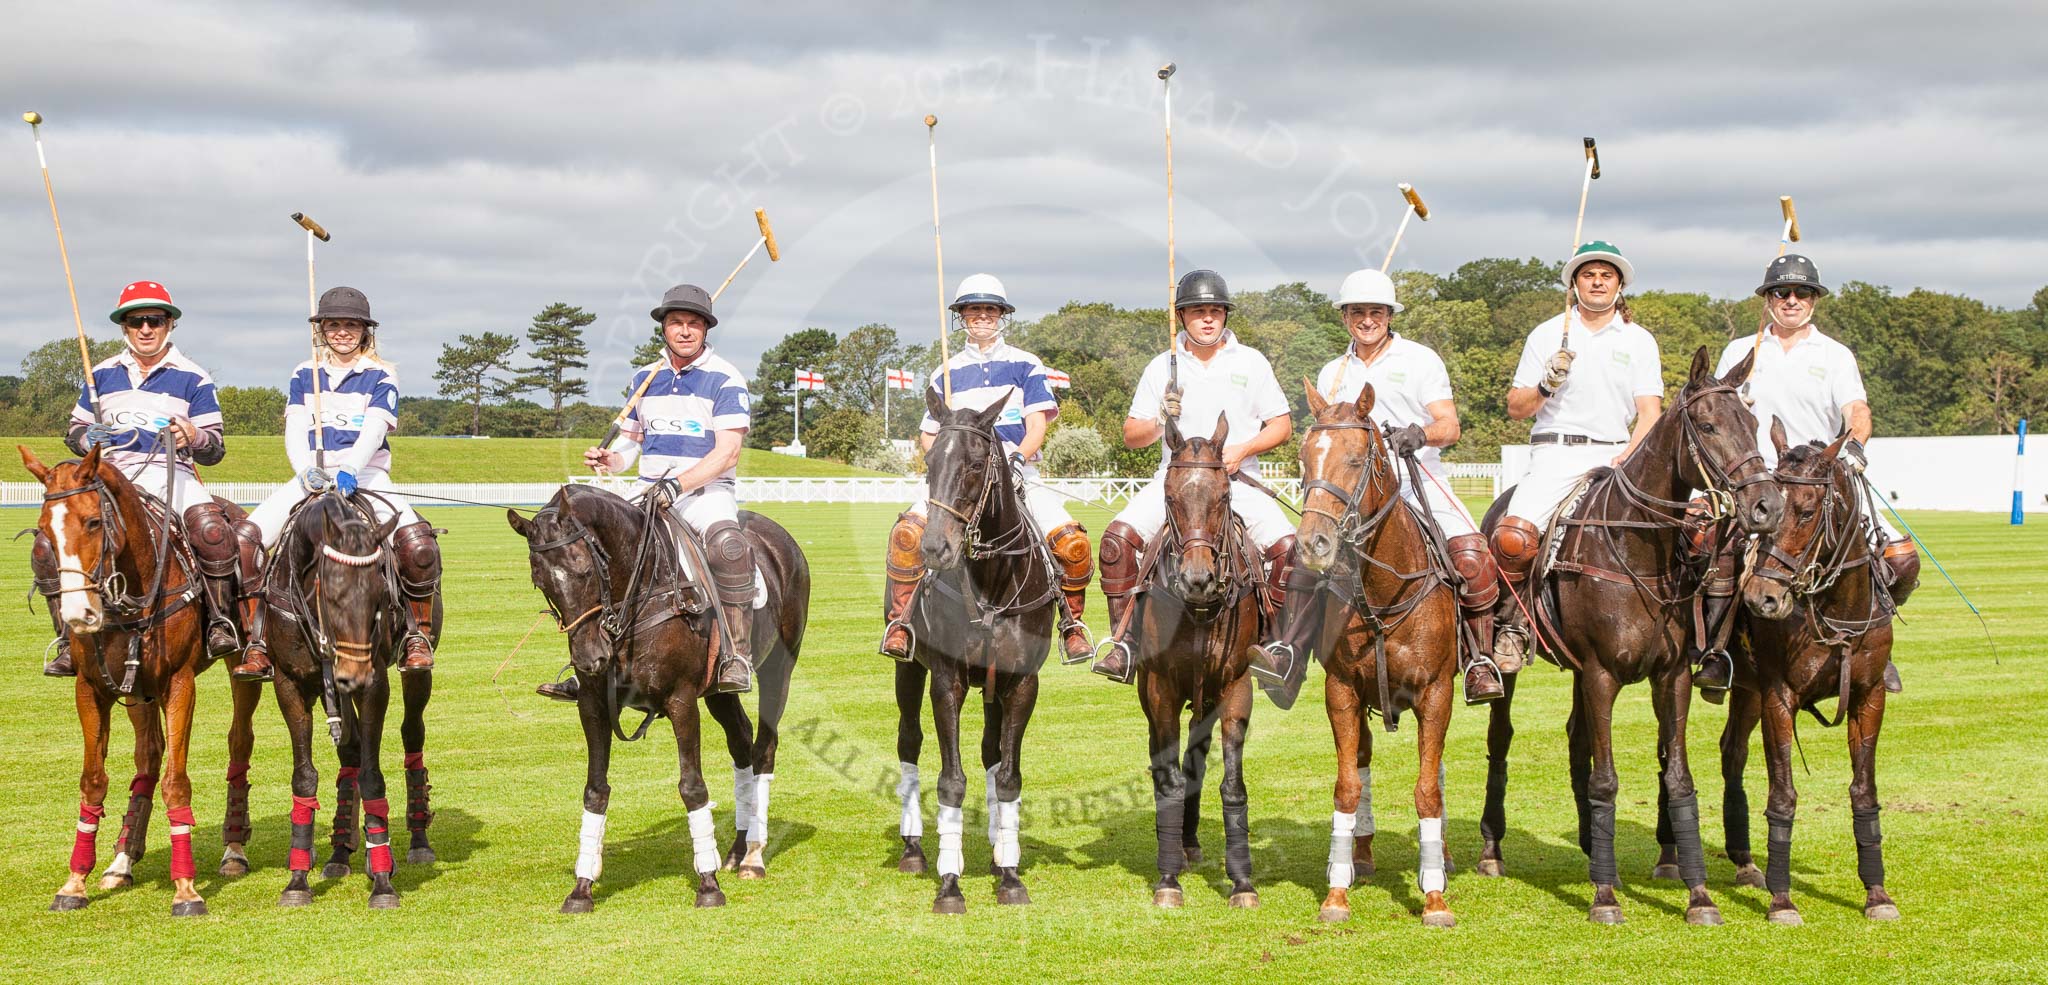 DBPC Polo in the Park 2012: JCS Polo team - Sebastian Funes, Emma Nicholson, Andy Coulbeck, Louise Coulbeck, and the Rated PeoplePolo Team - Alex Vent,Dag Khan, Lolito Castagnolo, Johnny Moreland-Lynn..
Dallas Burston Polo Club,
Stoneythorpe Estate,
Southam,
Warwickshire,
United Kingdom,
on 16 September 2012 at 11:23, image #90